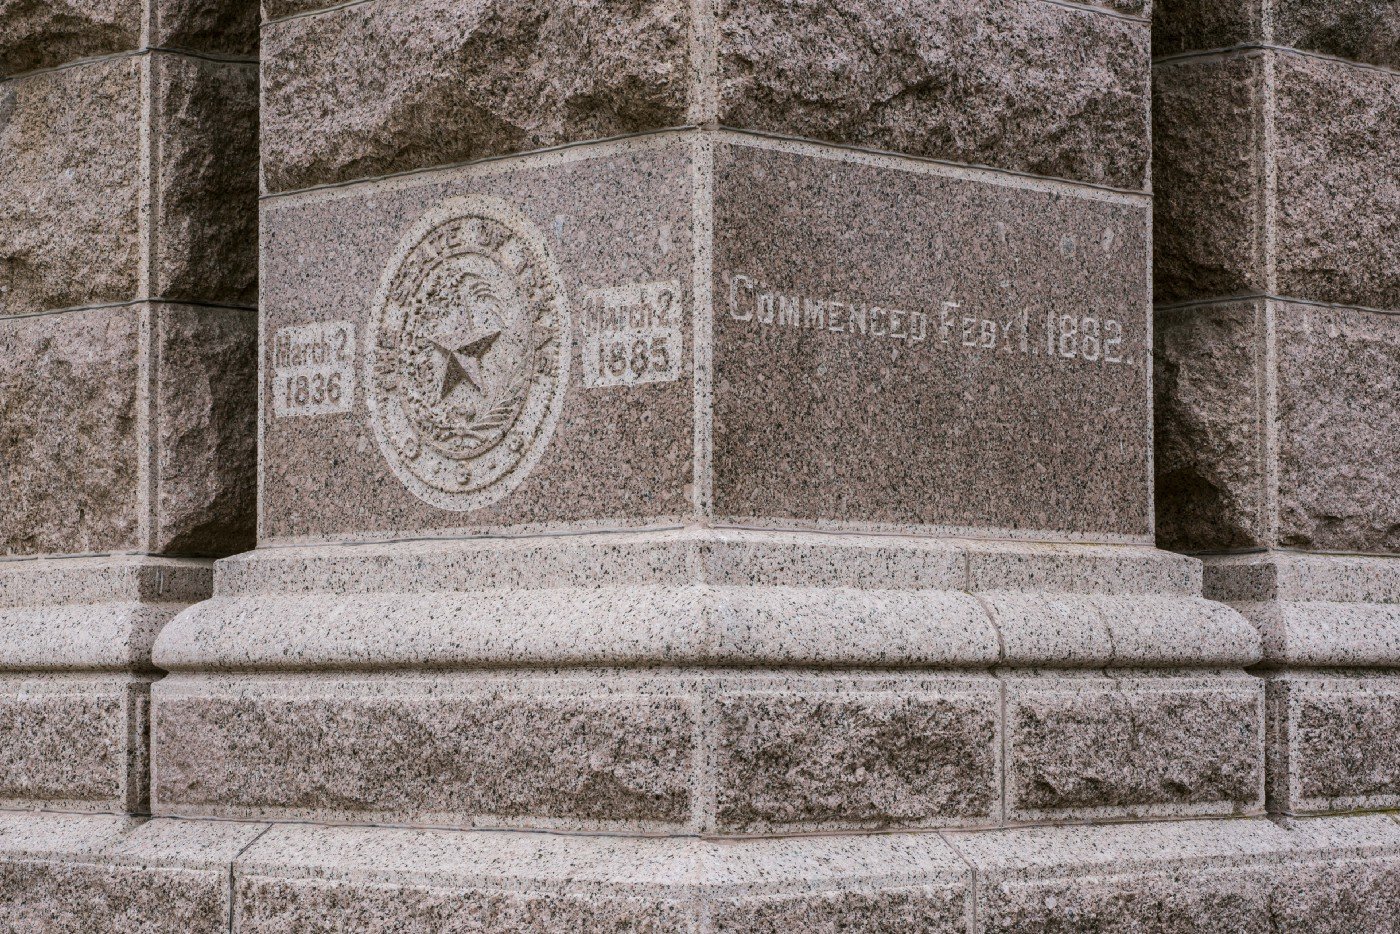 Cornerstone of the Texas Capitol Building